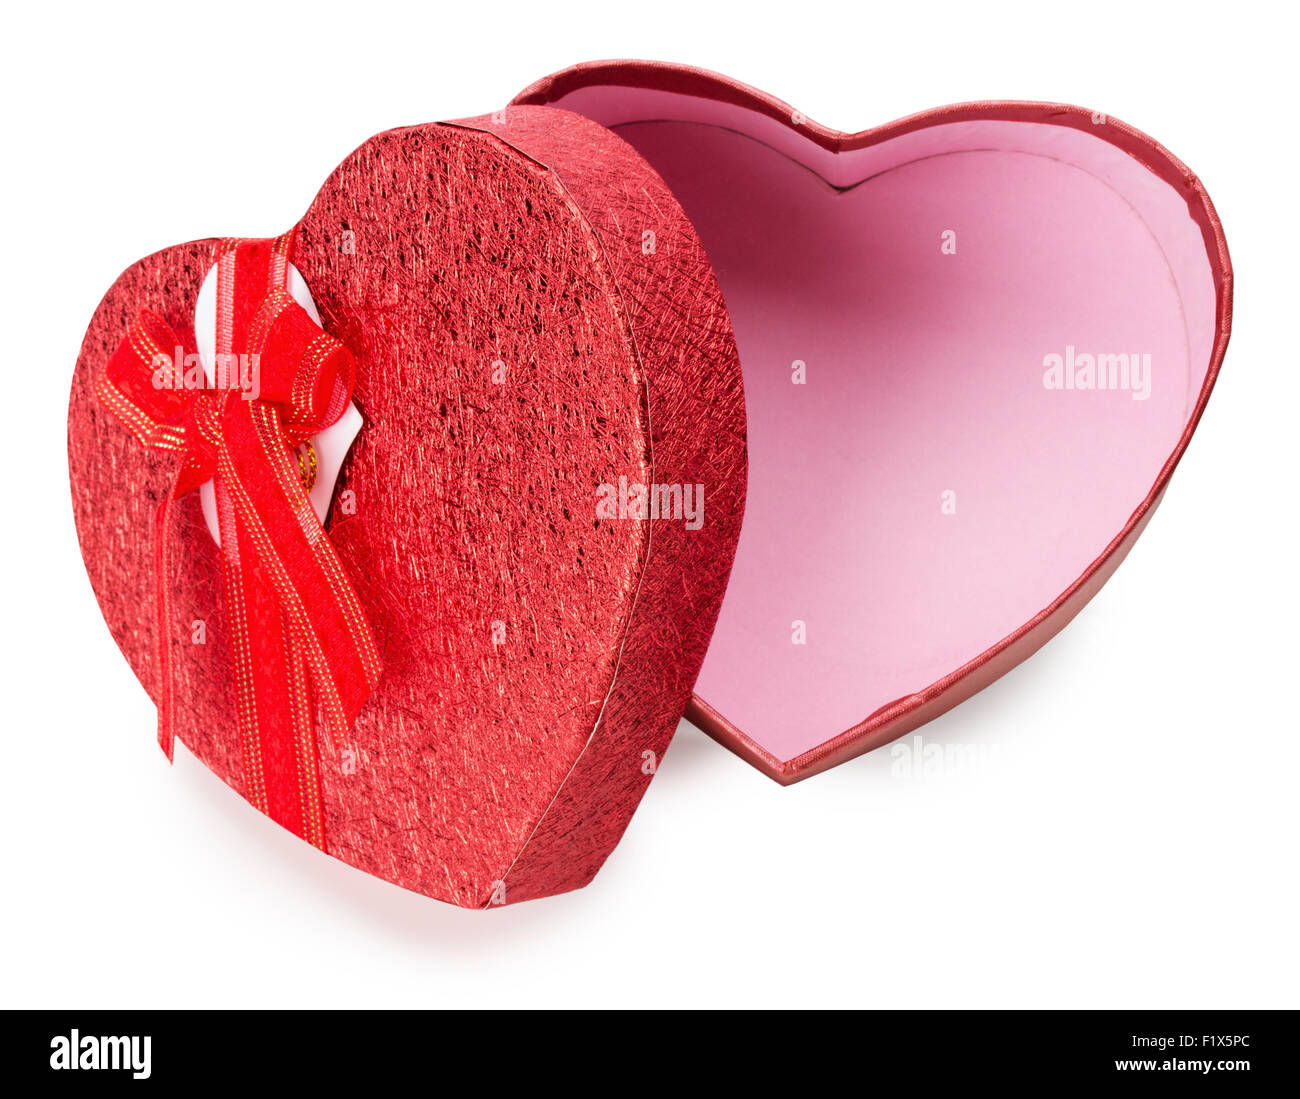 red heart-shaped gift box isolated on the white background. Stock Photo